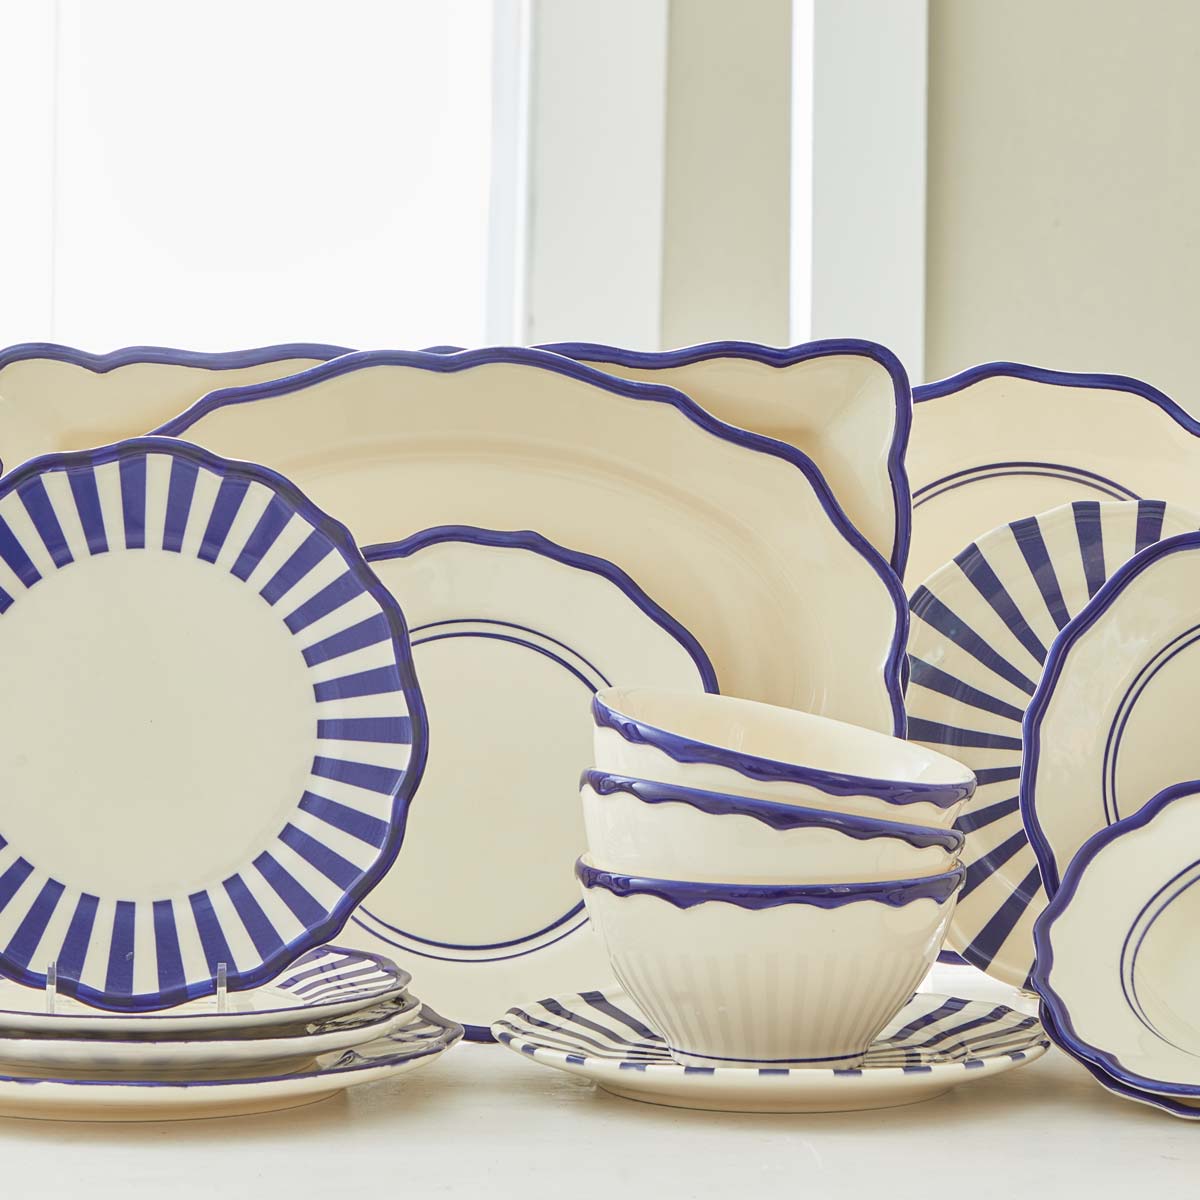 HAND-PAINTED DINNERWARE - AWNING STRIPES